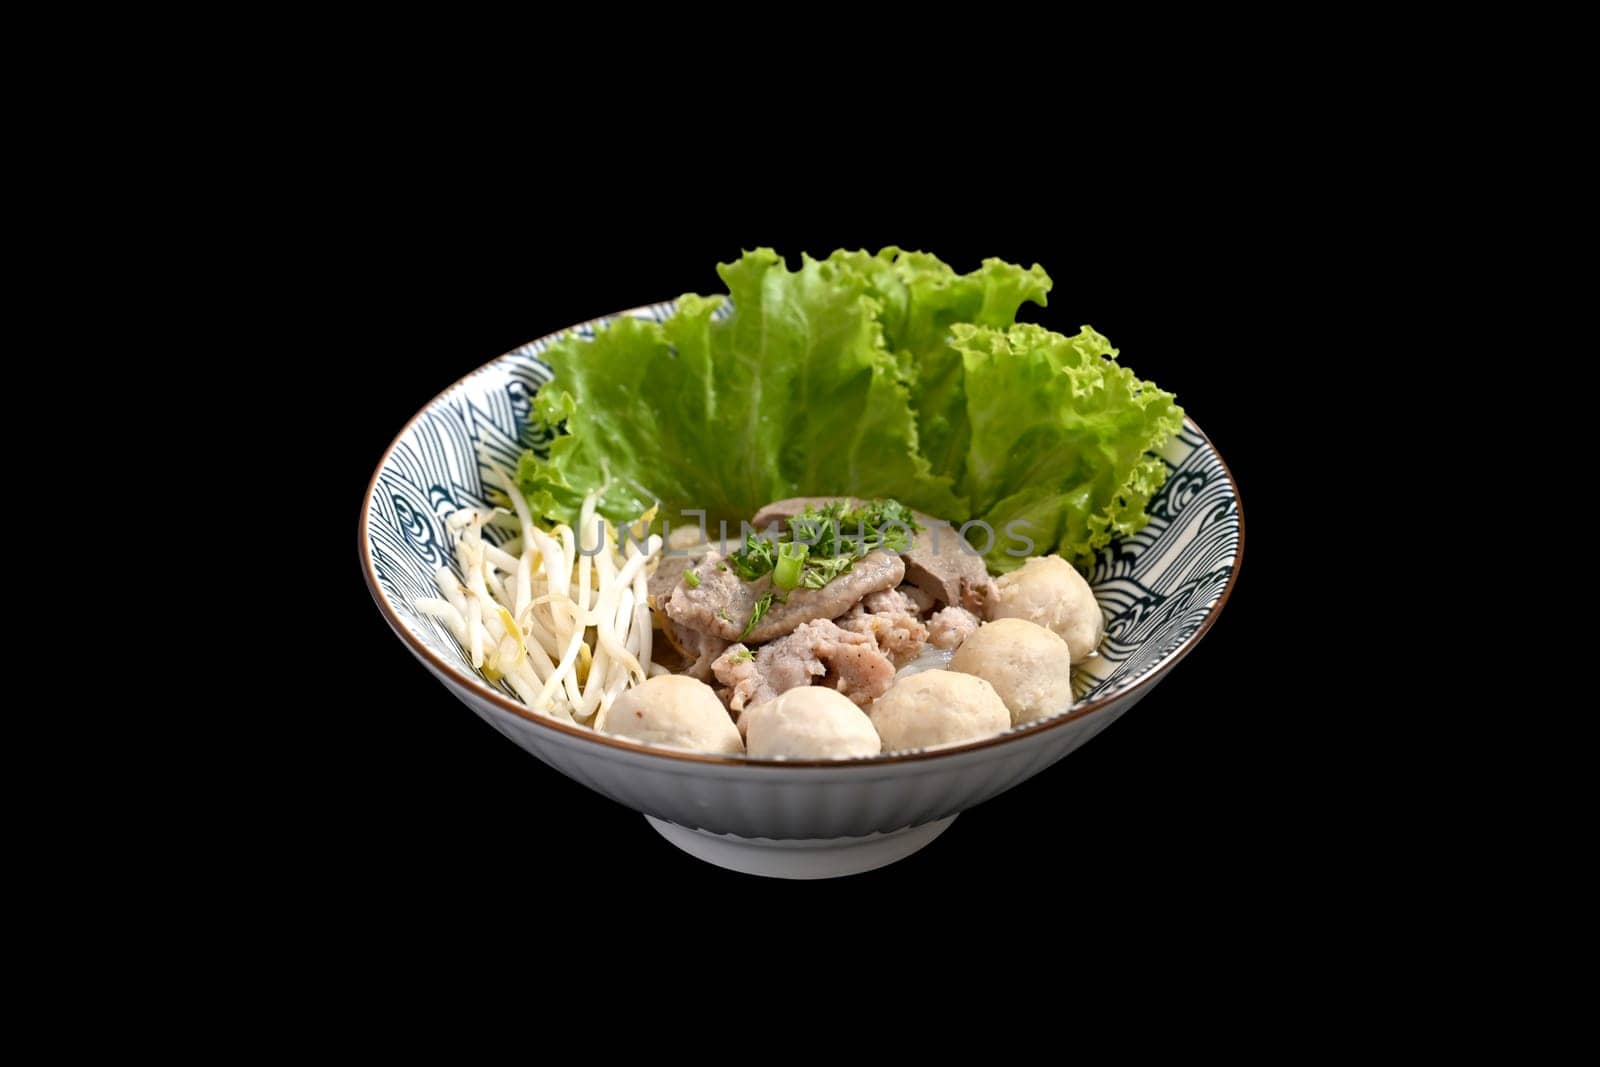 Thai noodles soup with boiled pork offal and vegetables serve in bowl on black background. Asian food concept.